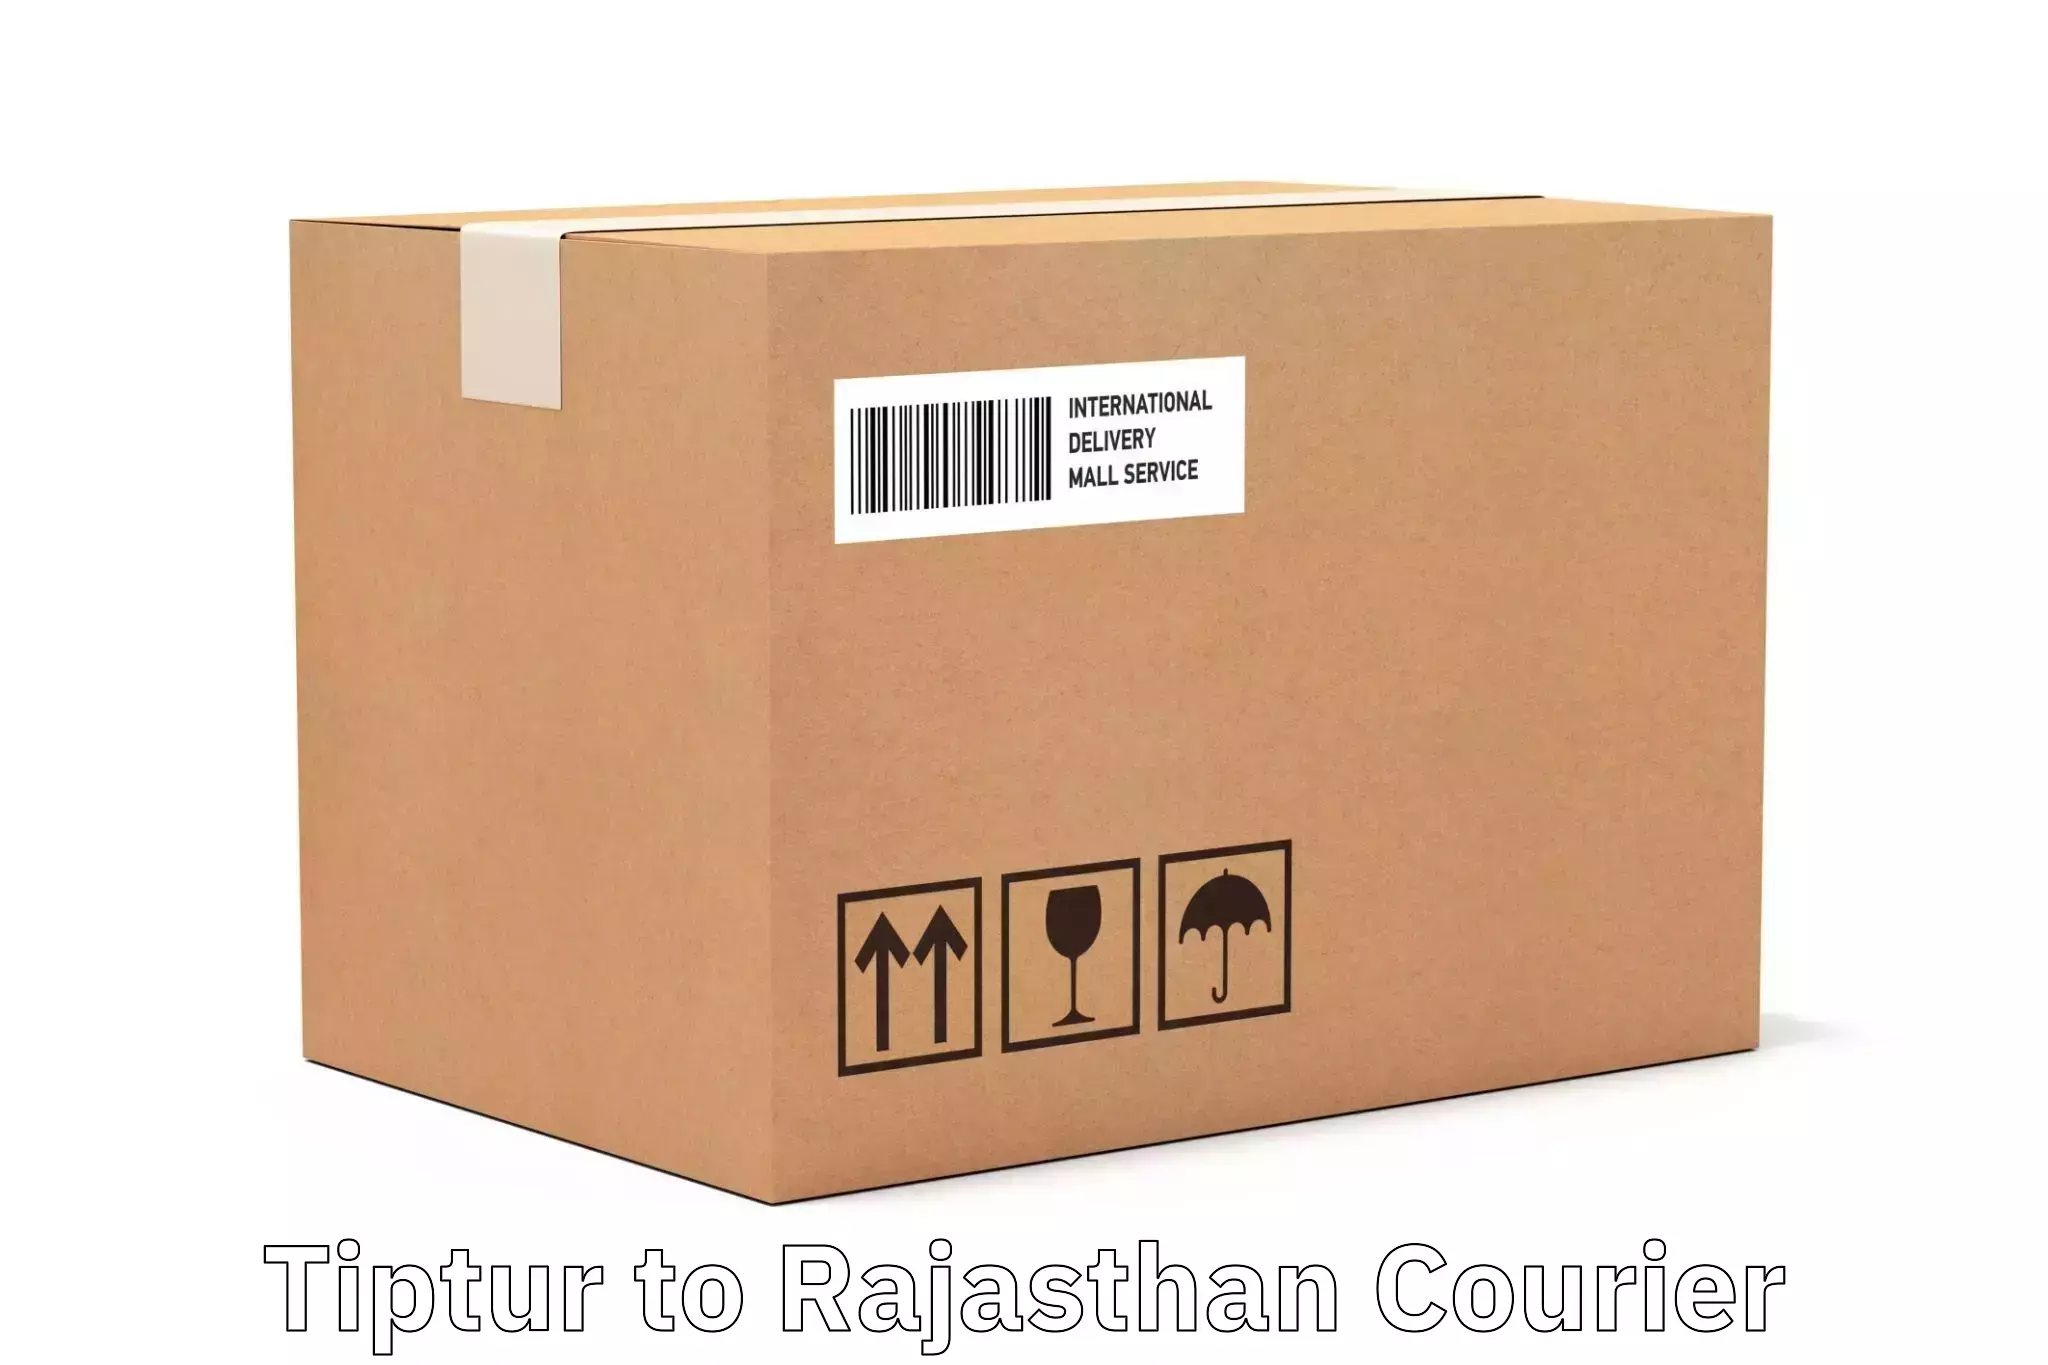 Comprehensive parcel tracking in Tiptur to Laxmangarh